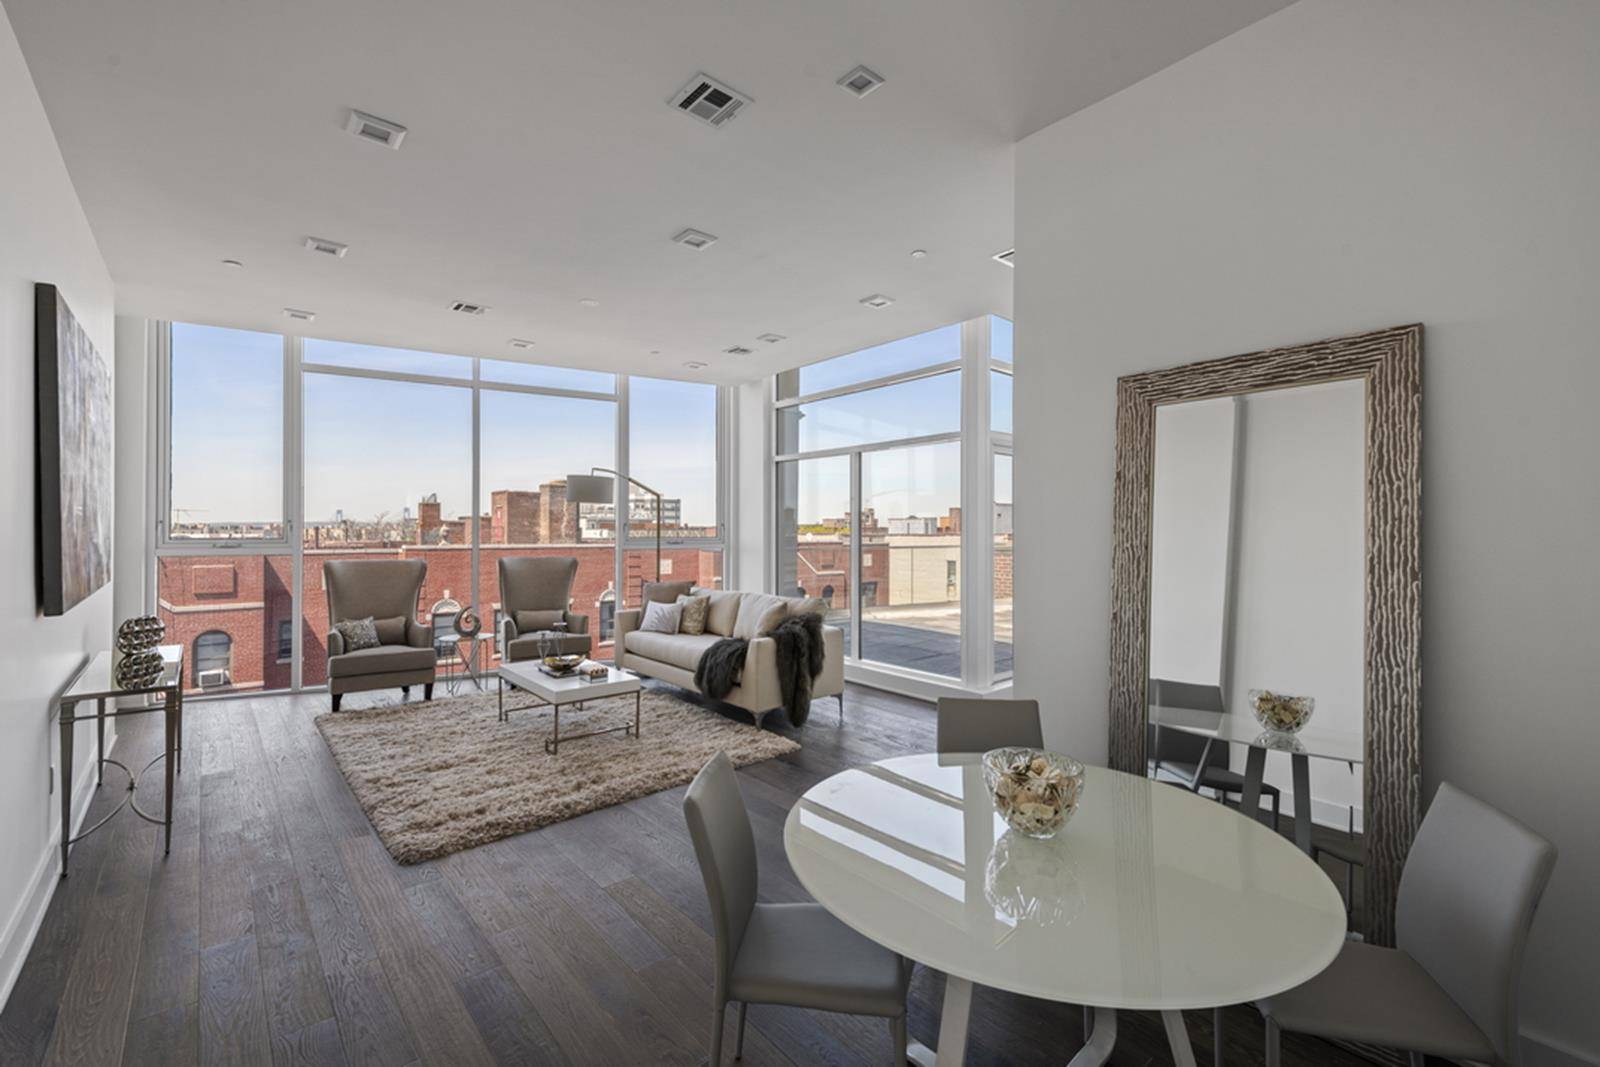 A sublime floor through penthouse graced with a trio of private outdoor spaces, this 3 bedroom, 2.